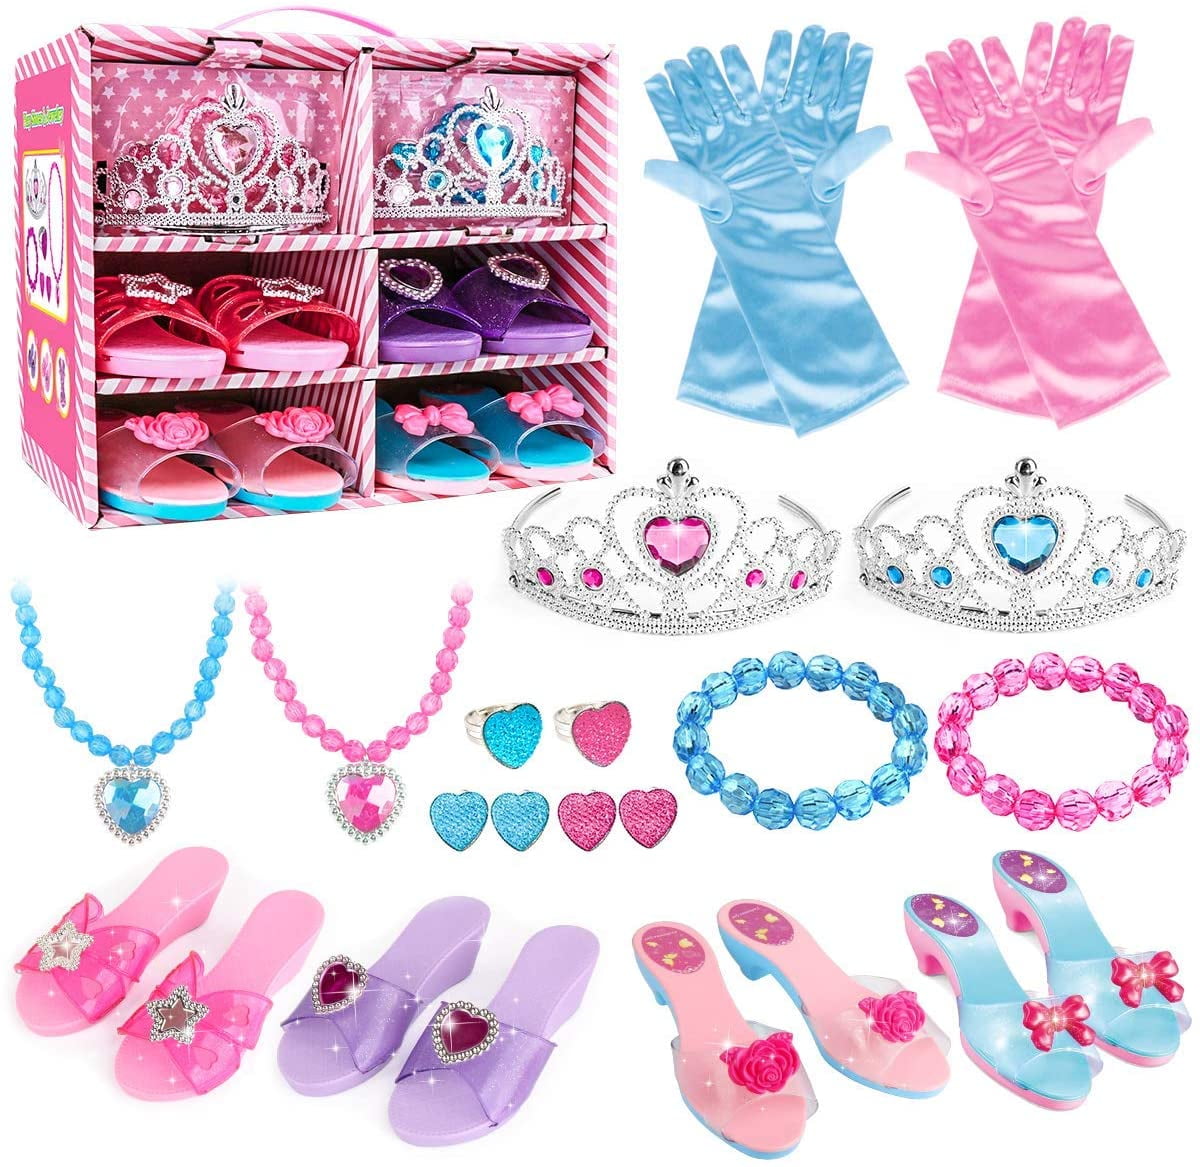 10 Pairs  Princess Shoes  Dolls Accessories For Kids Girls Gift Db